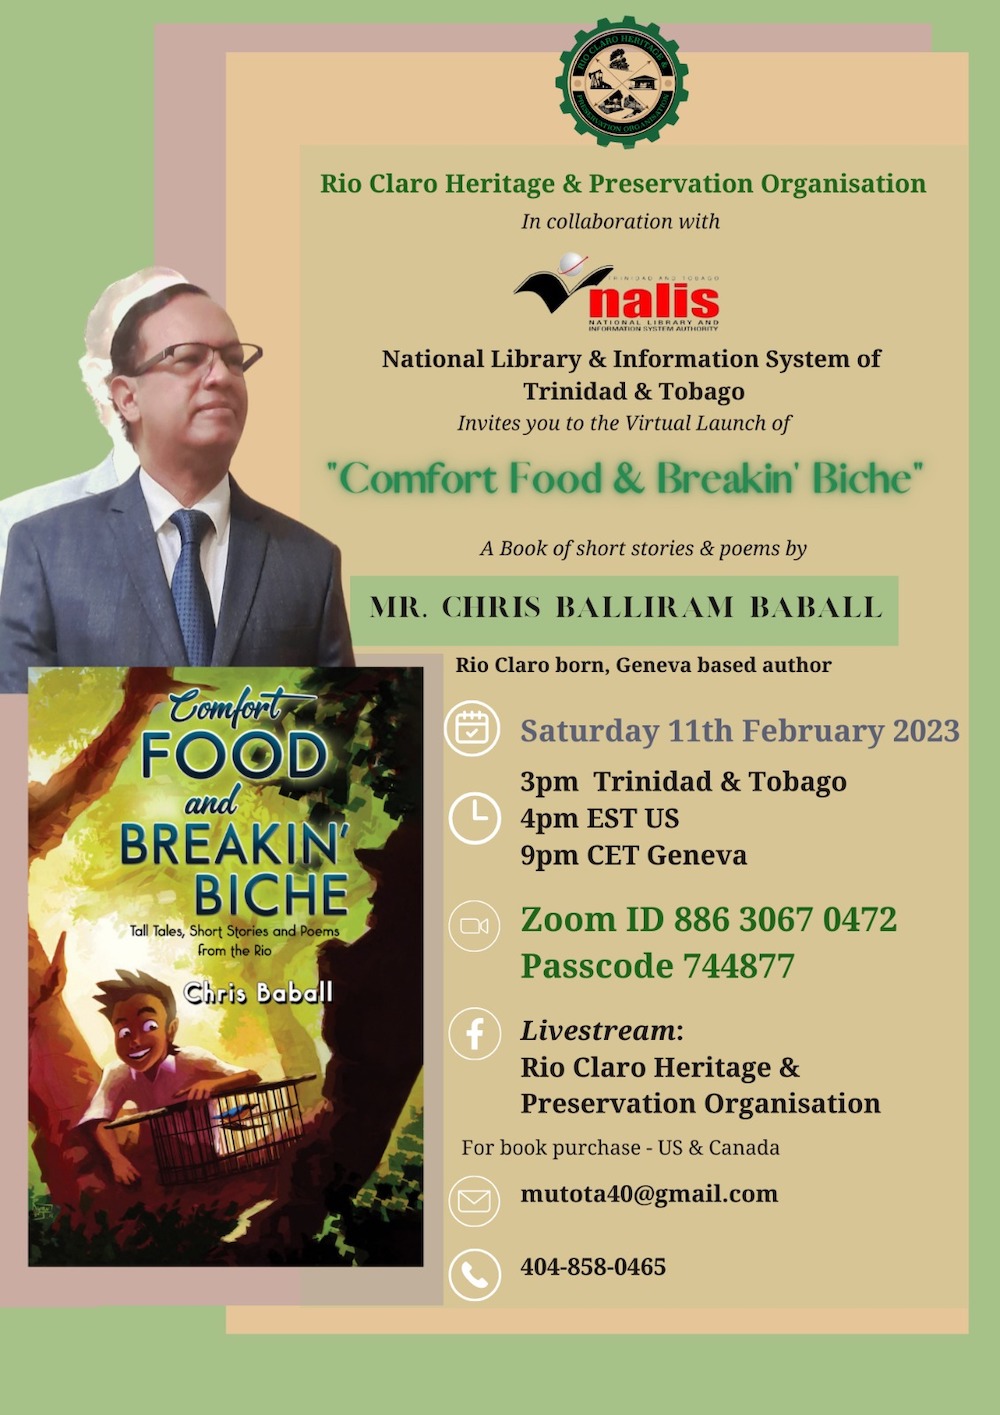 Book launch Comfort Food and Breakin' Biche - Chris Baball